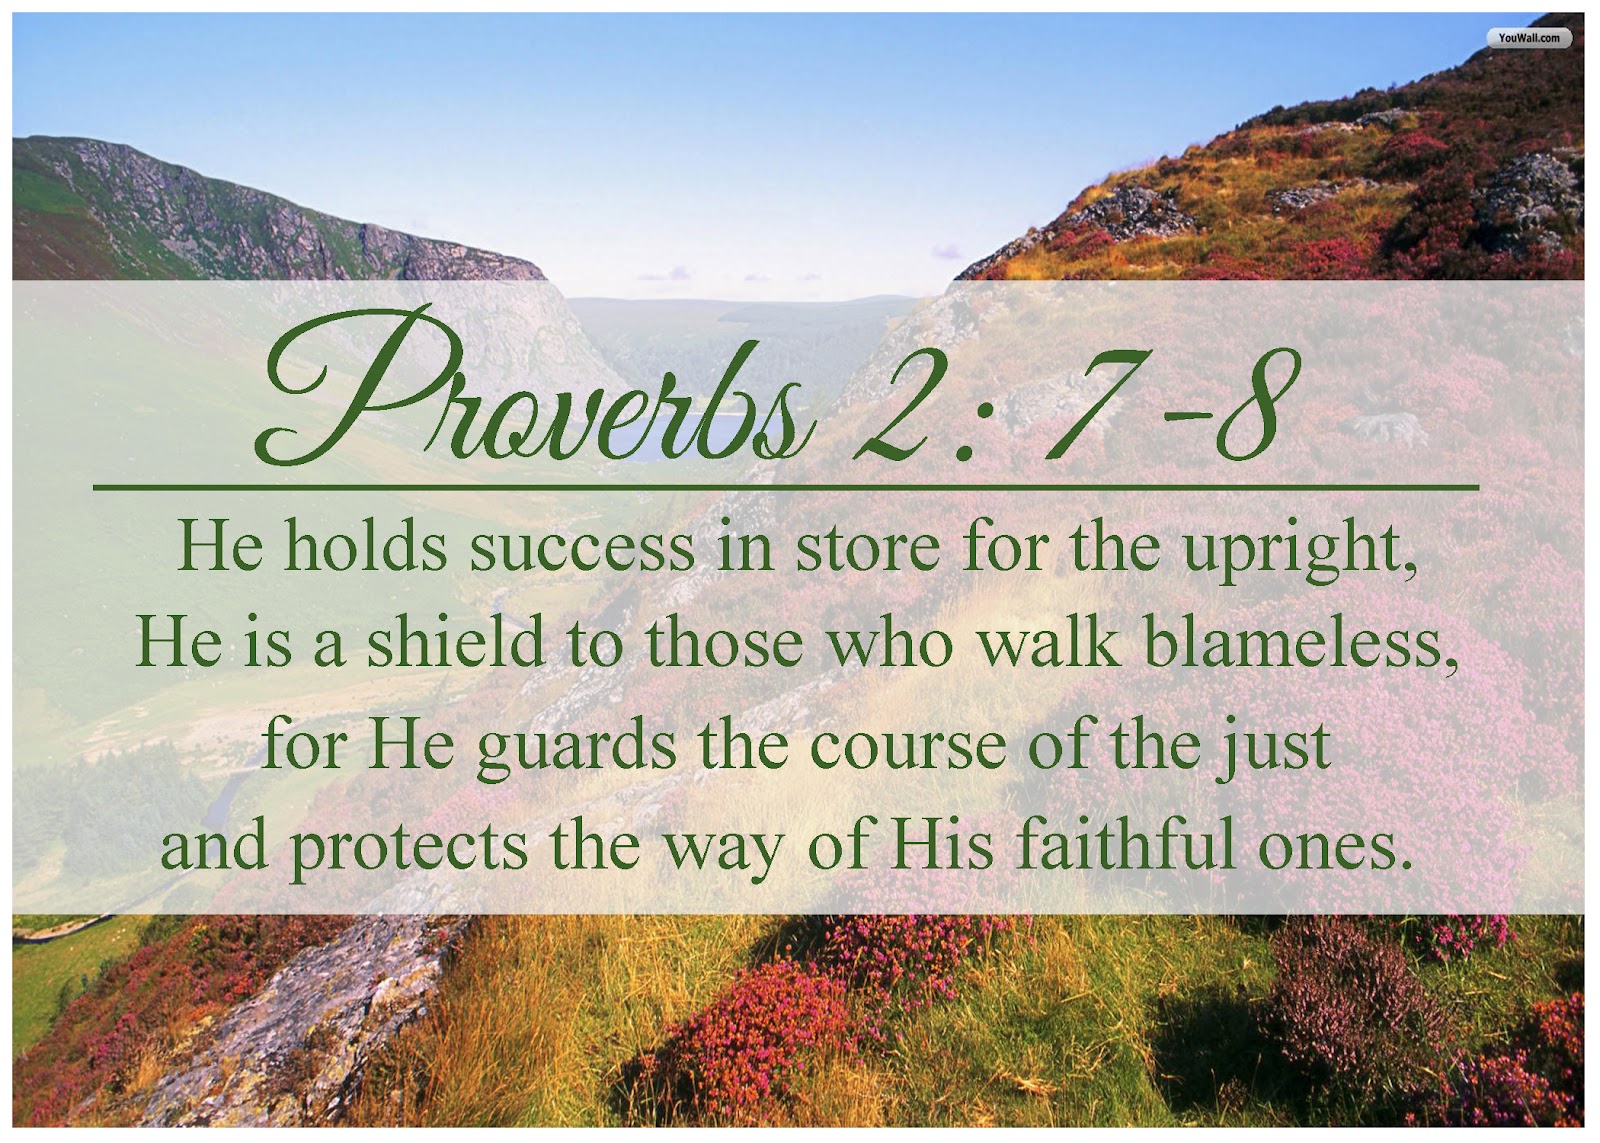 PROVERBS 2 HE IS A SHIELD for the righteous.jpg